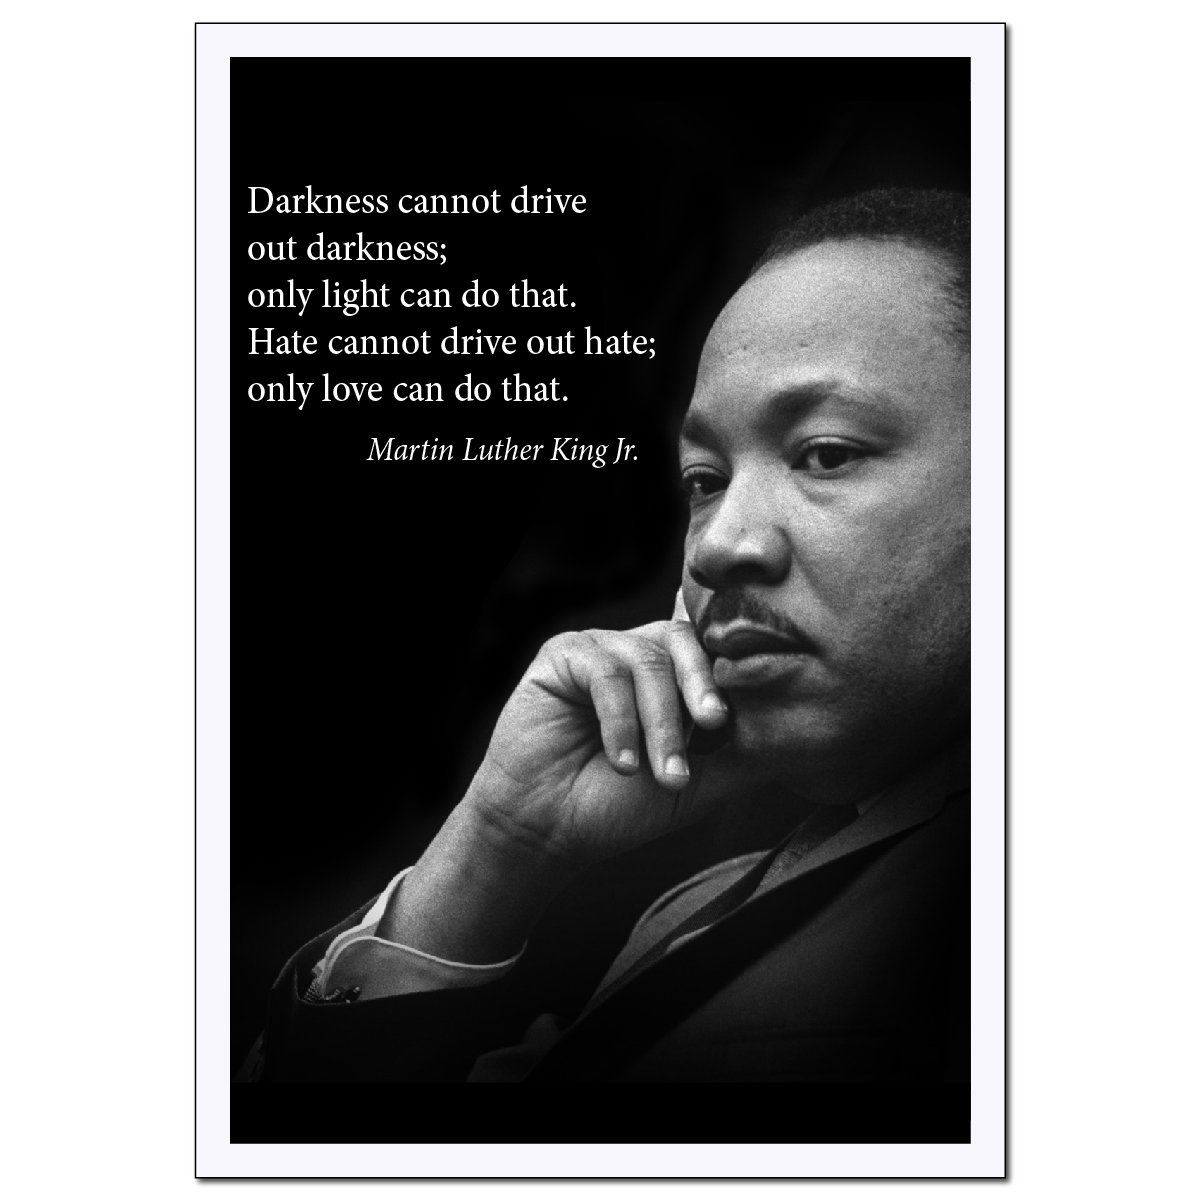 Martin Luther King Jr. Poster famous inspirational quote LARGE banner"Darkness Cannot Drive Out Darkness only light can do that" for educat...